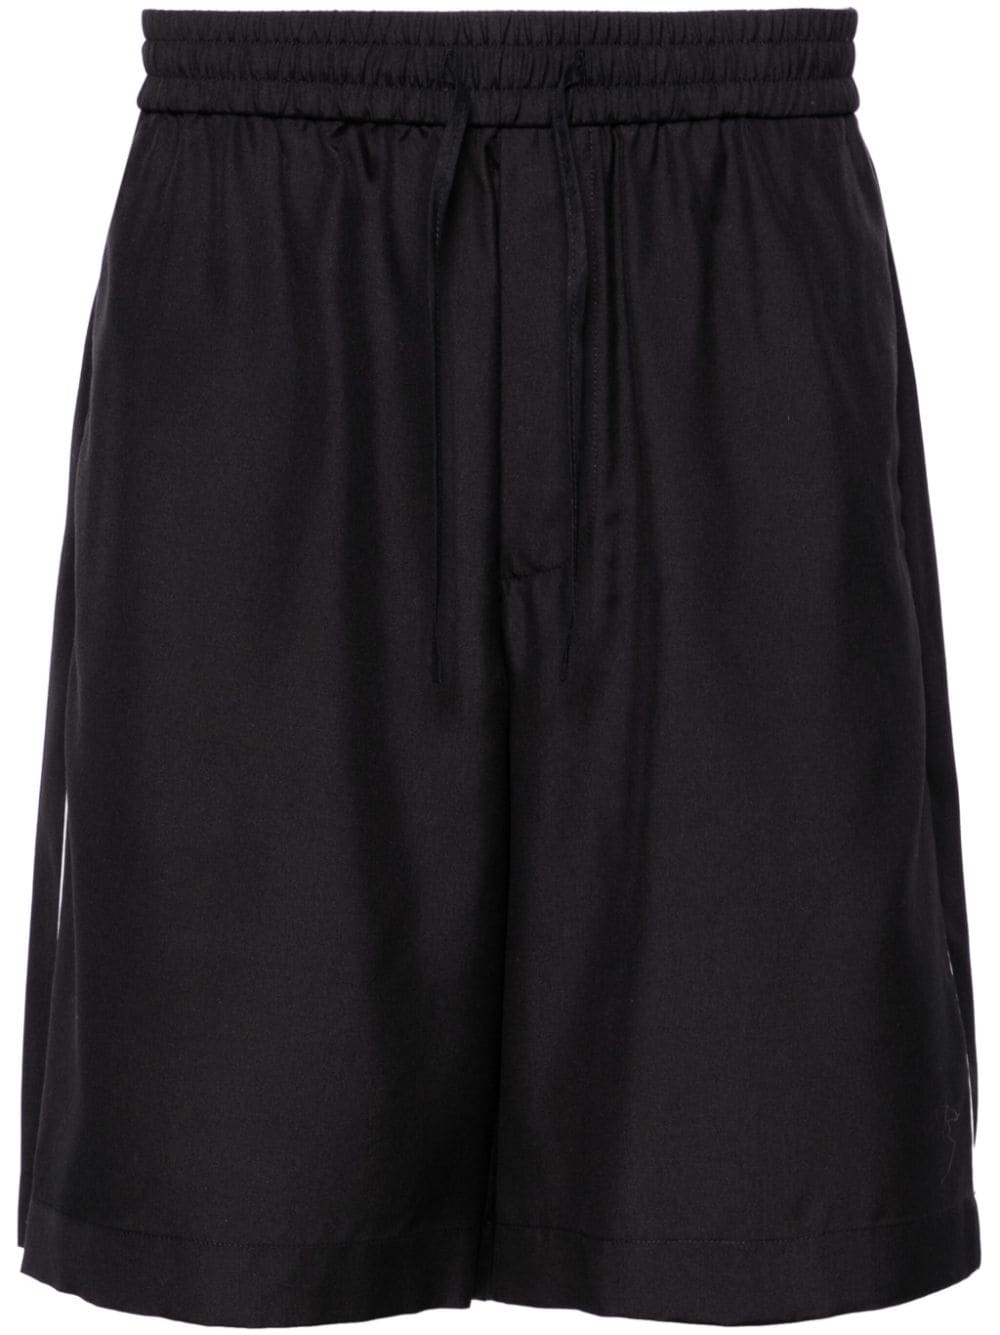 VALENTINO Men's Black Silk Embroidered Shorts with Side Stripe Detailing